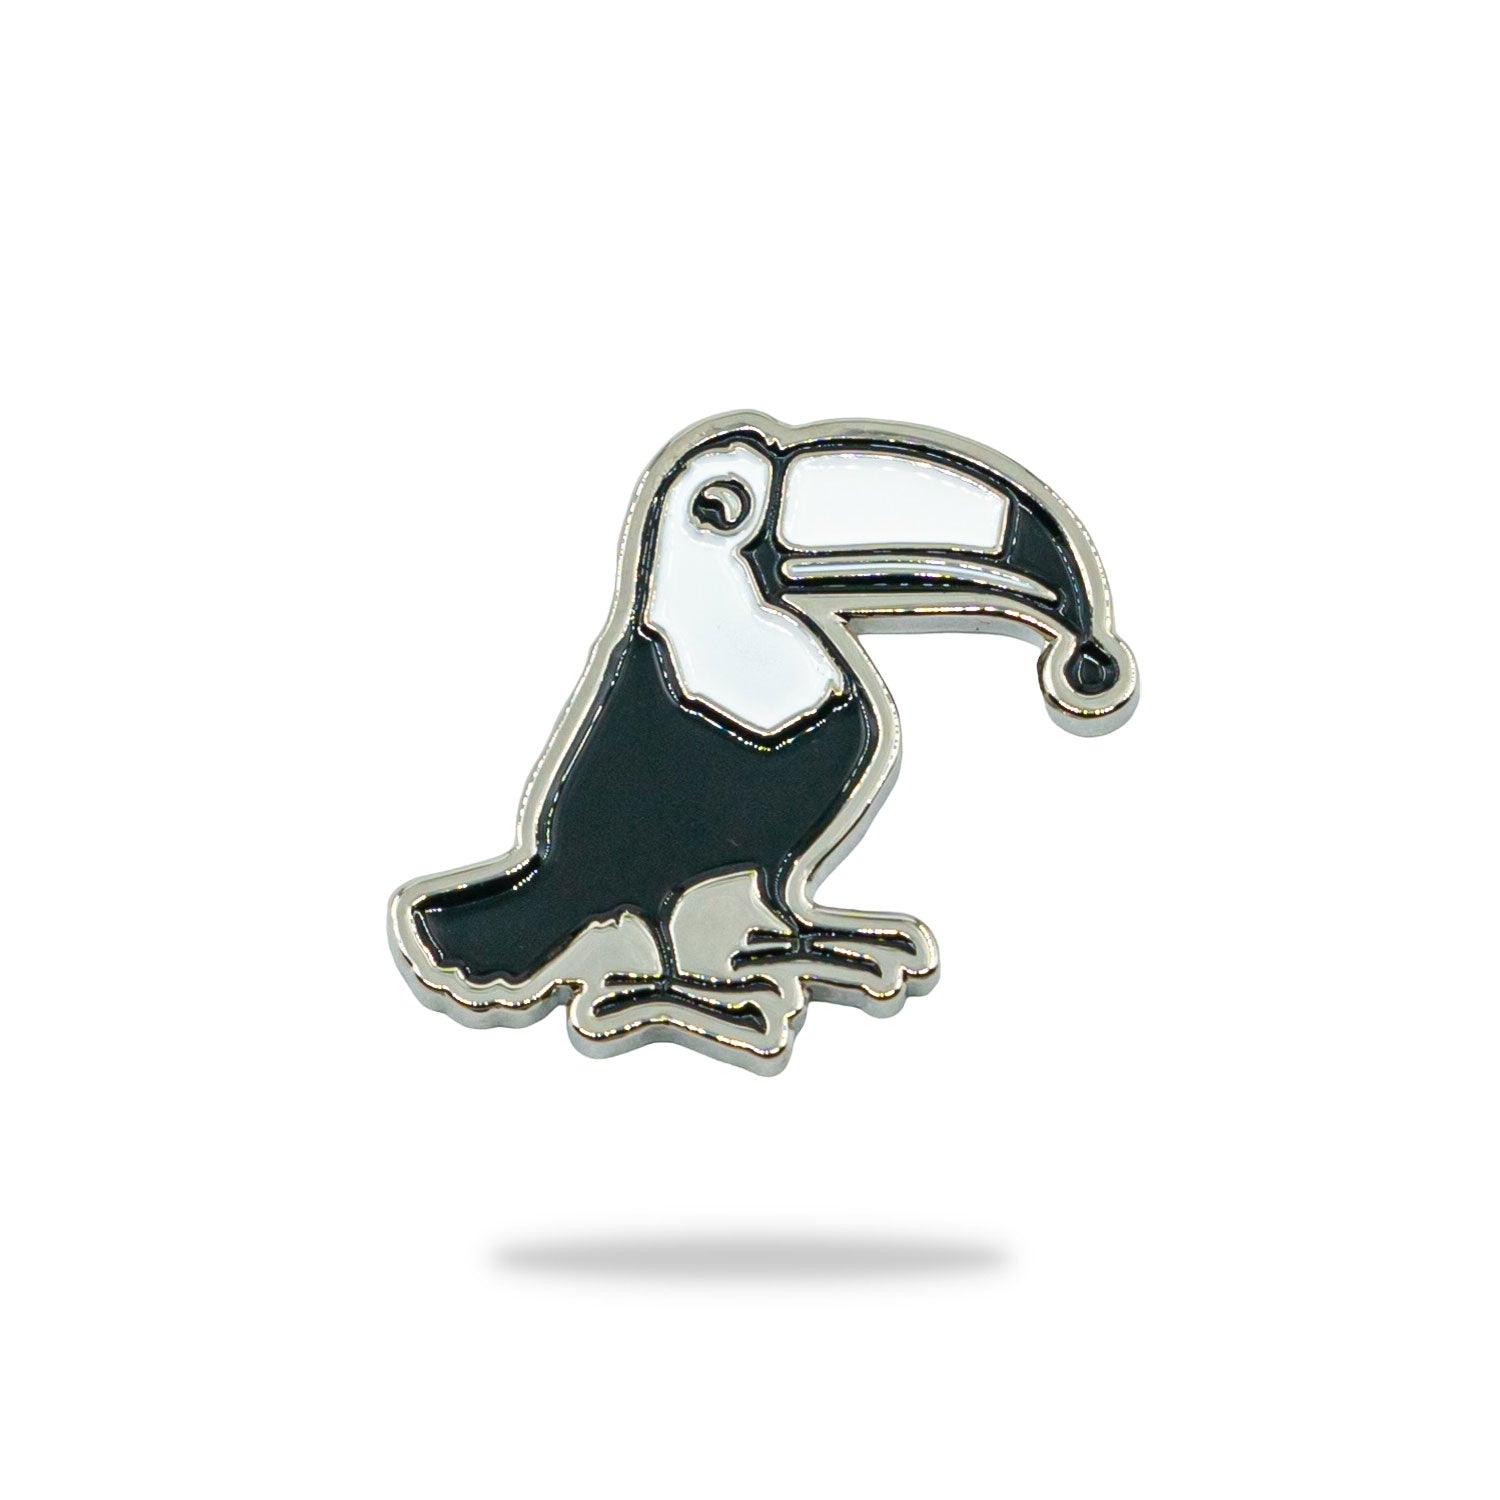 lead tape chronicles toucan golf ball marker main product photo